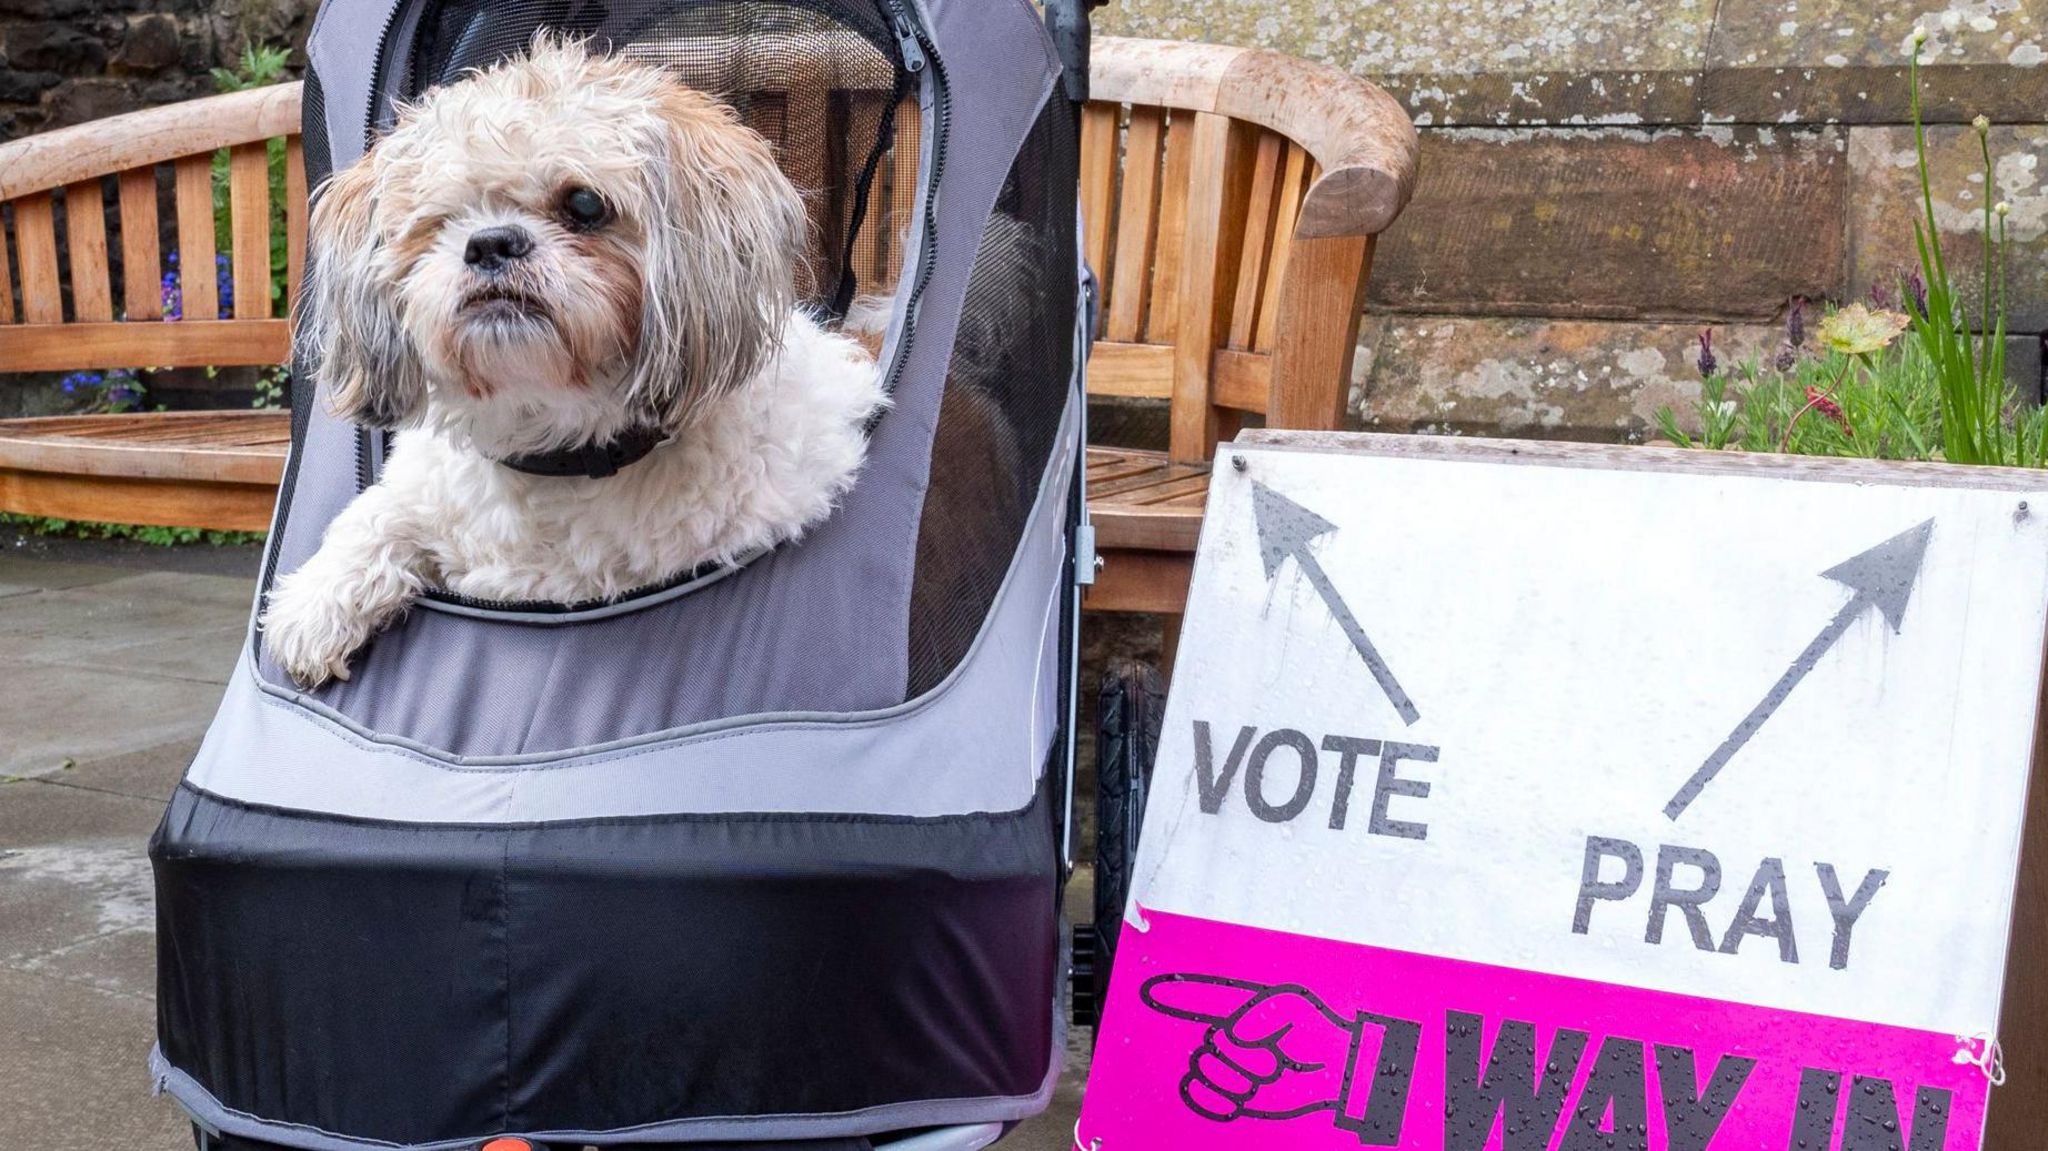 A shih tzu with one eye sits in a specialist buggy outside a polling station at a church in Edinburgh.